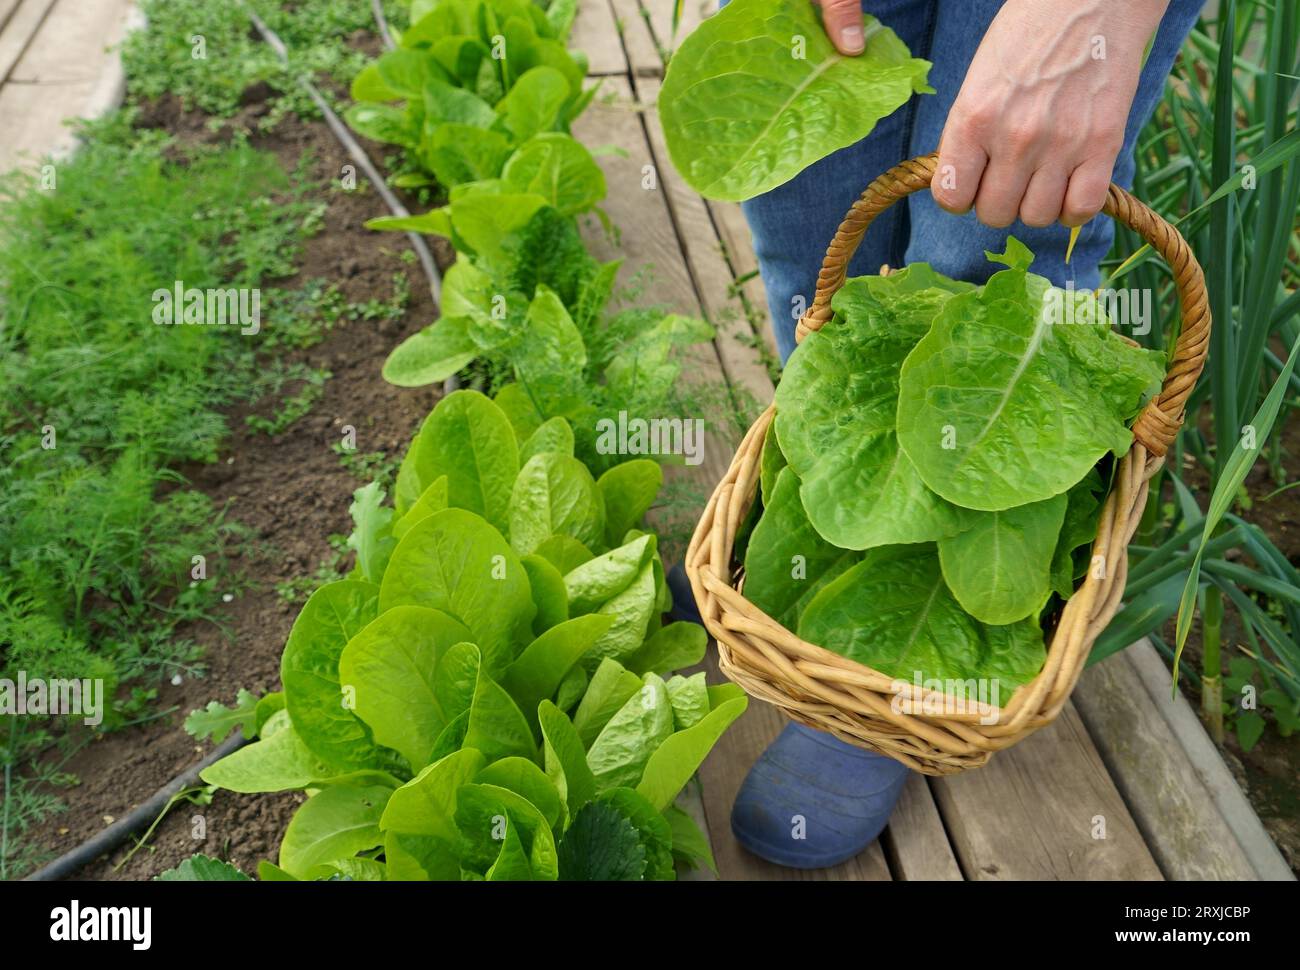 Growing green salads and vegetables in a greenhouse. Hydroponics grows in a greenhouse. The gardener cuts green lettuce leaves and puts them in a bask Stock Photo